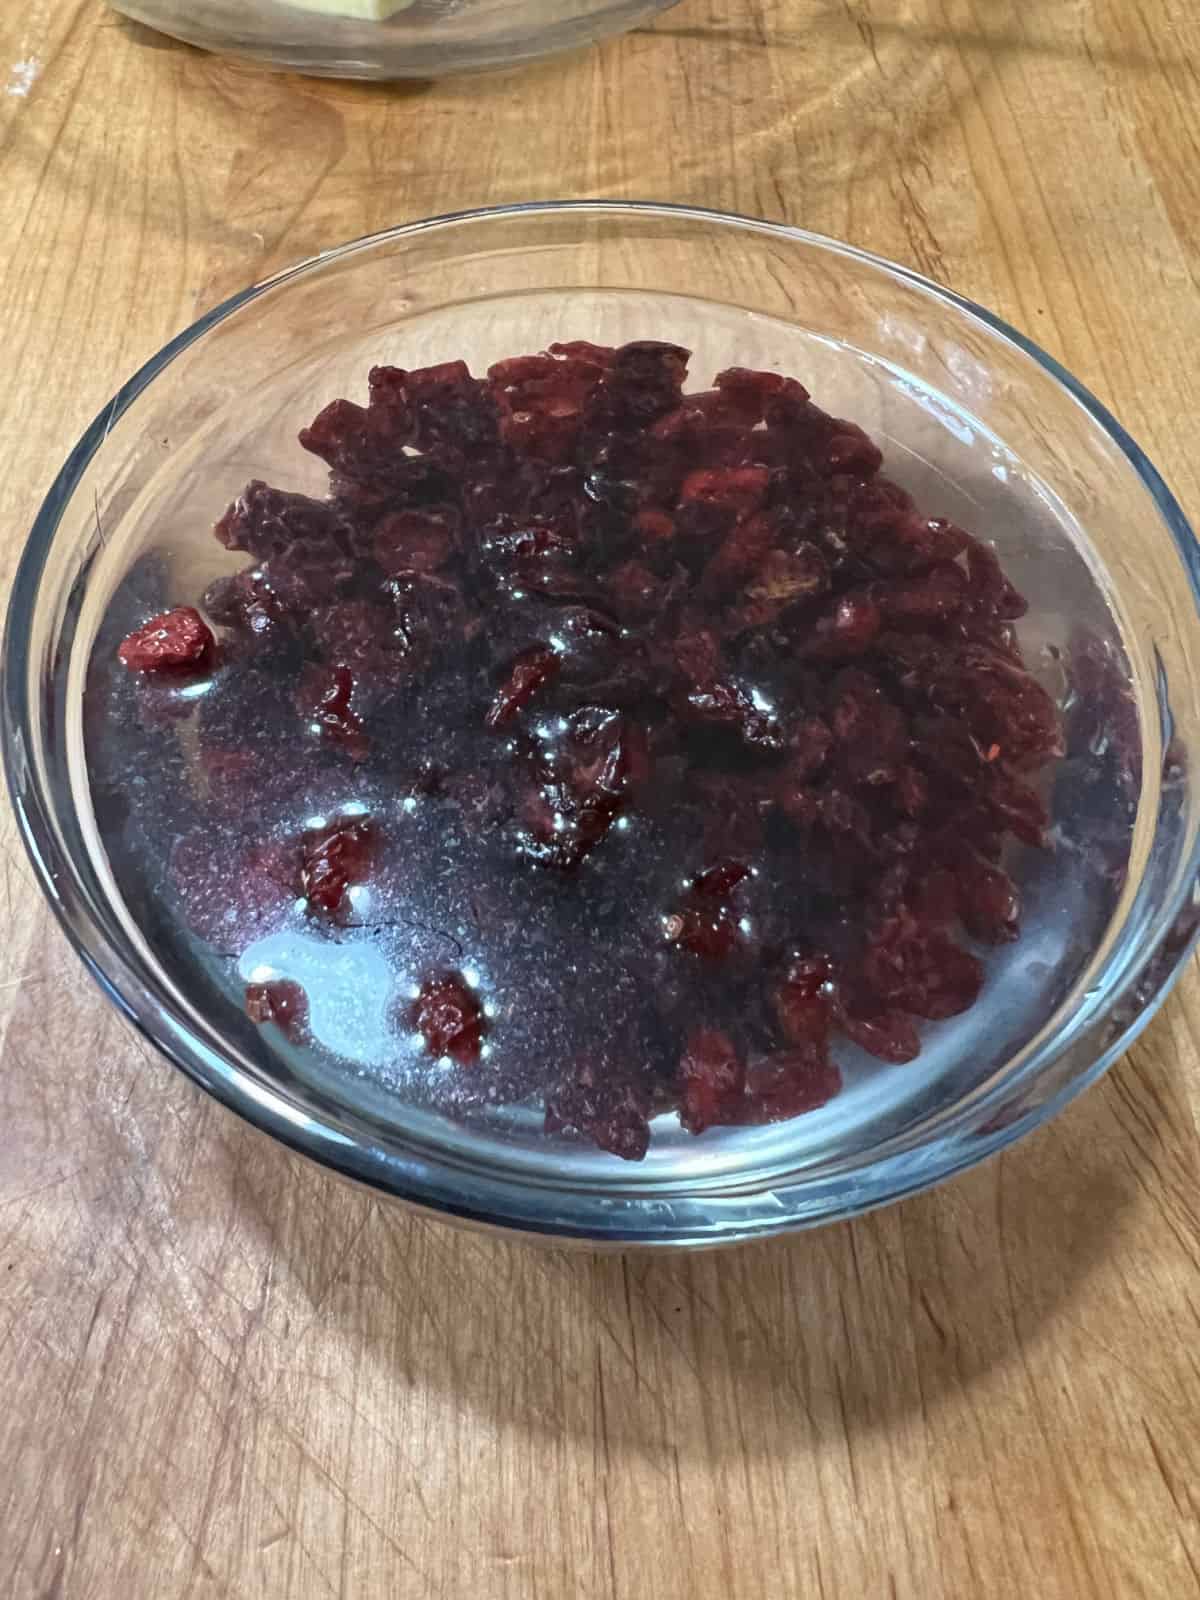 Dried cranberries soaking in water.